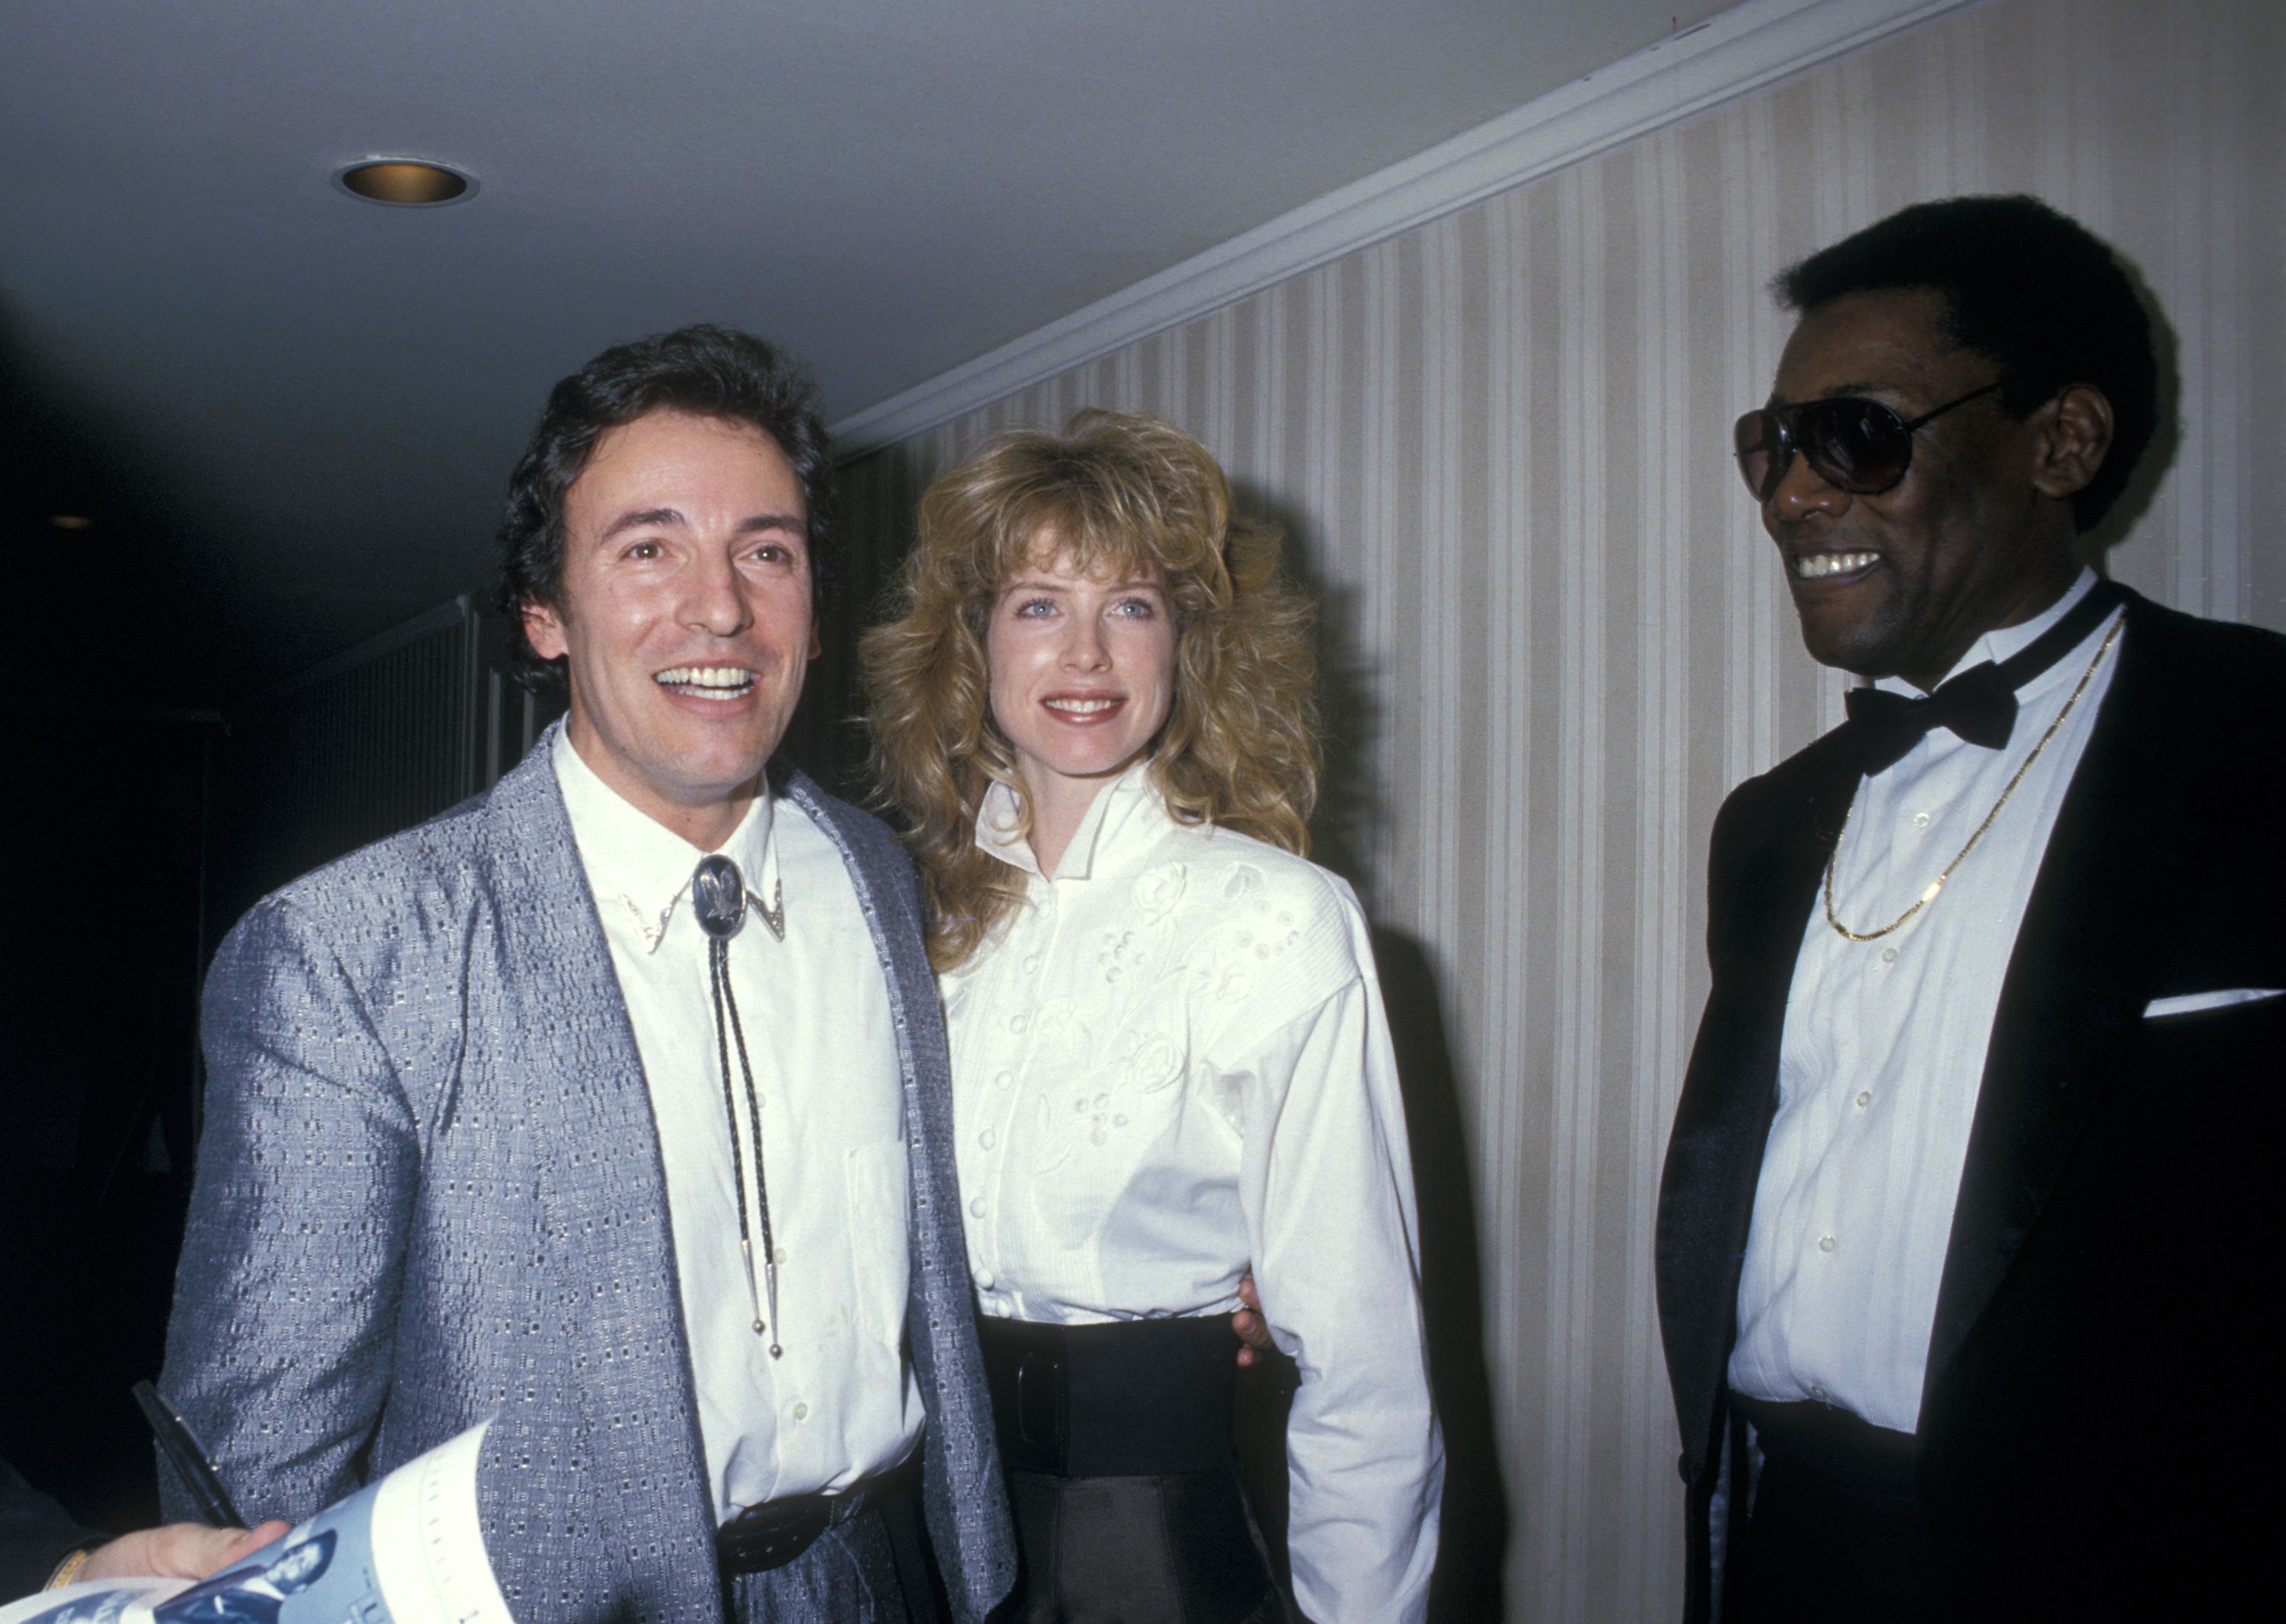 Bruce Springsteen, Julianne Phillips and Guest at the Waldorf Astoria Hotel in New York City, New York  | Source: Getty Images